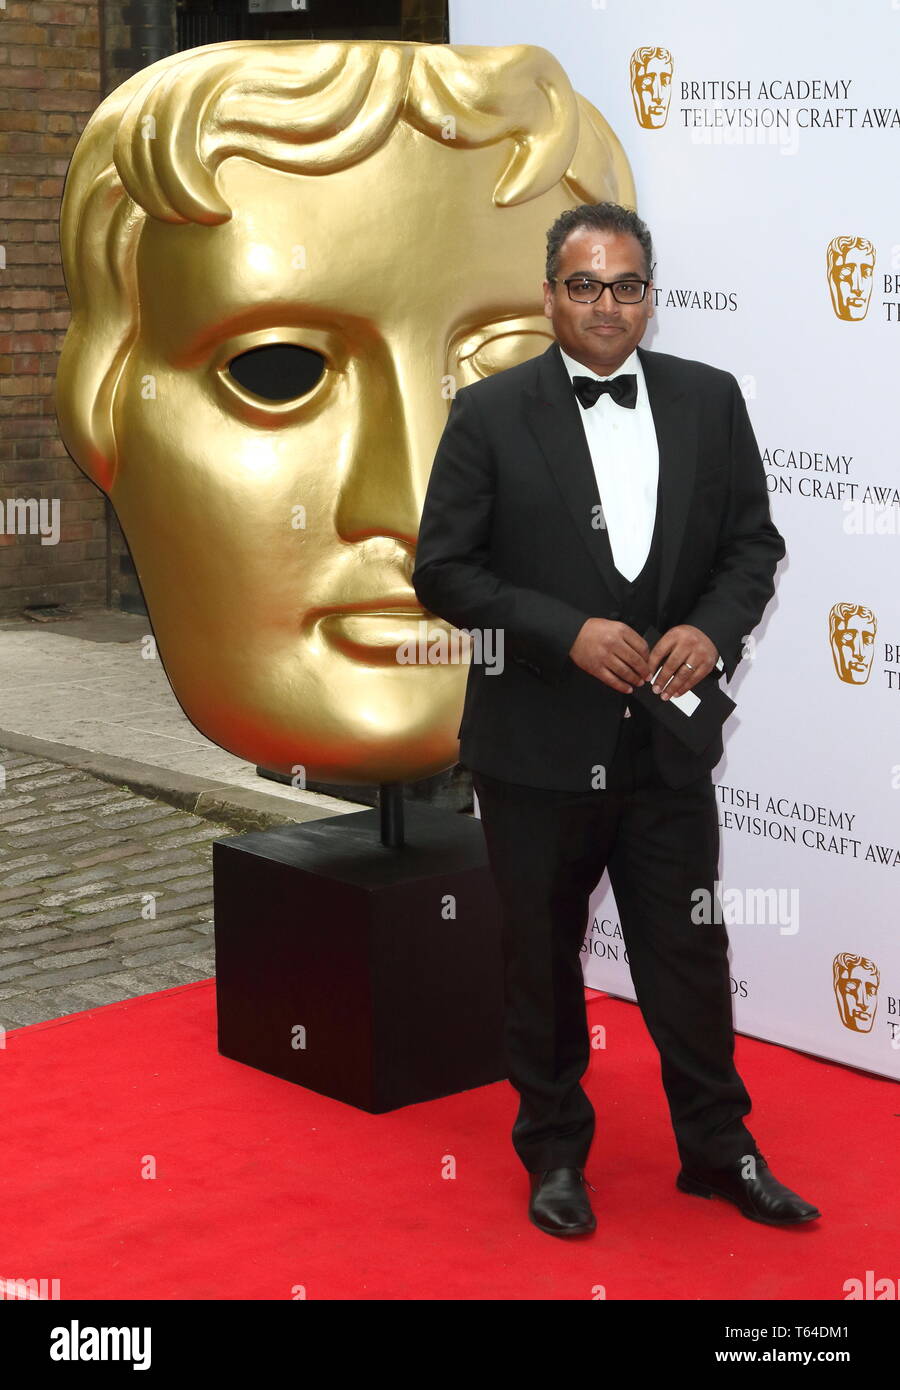 London, UK. 28th Apr, 2019. Krishnan Guru-Murthy at the British Academy (BAFTA) Television Craft Awards at The Brewery, Chiswell Street Credit: SOPA Images Limited/Alamy Live News Stock Photo